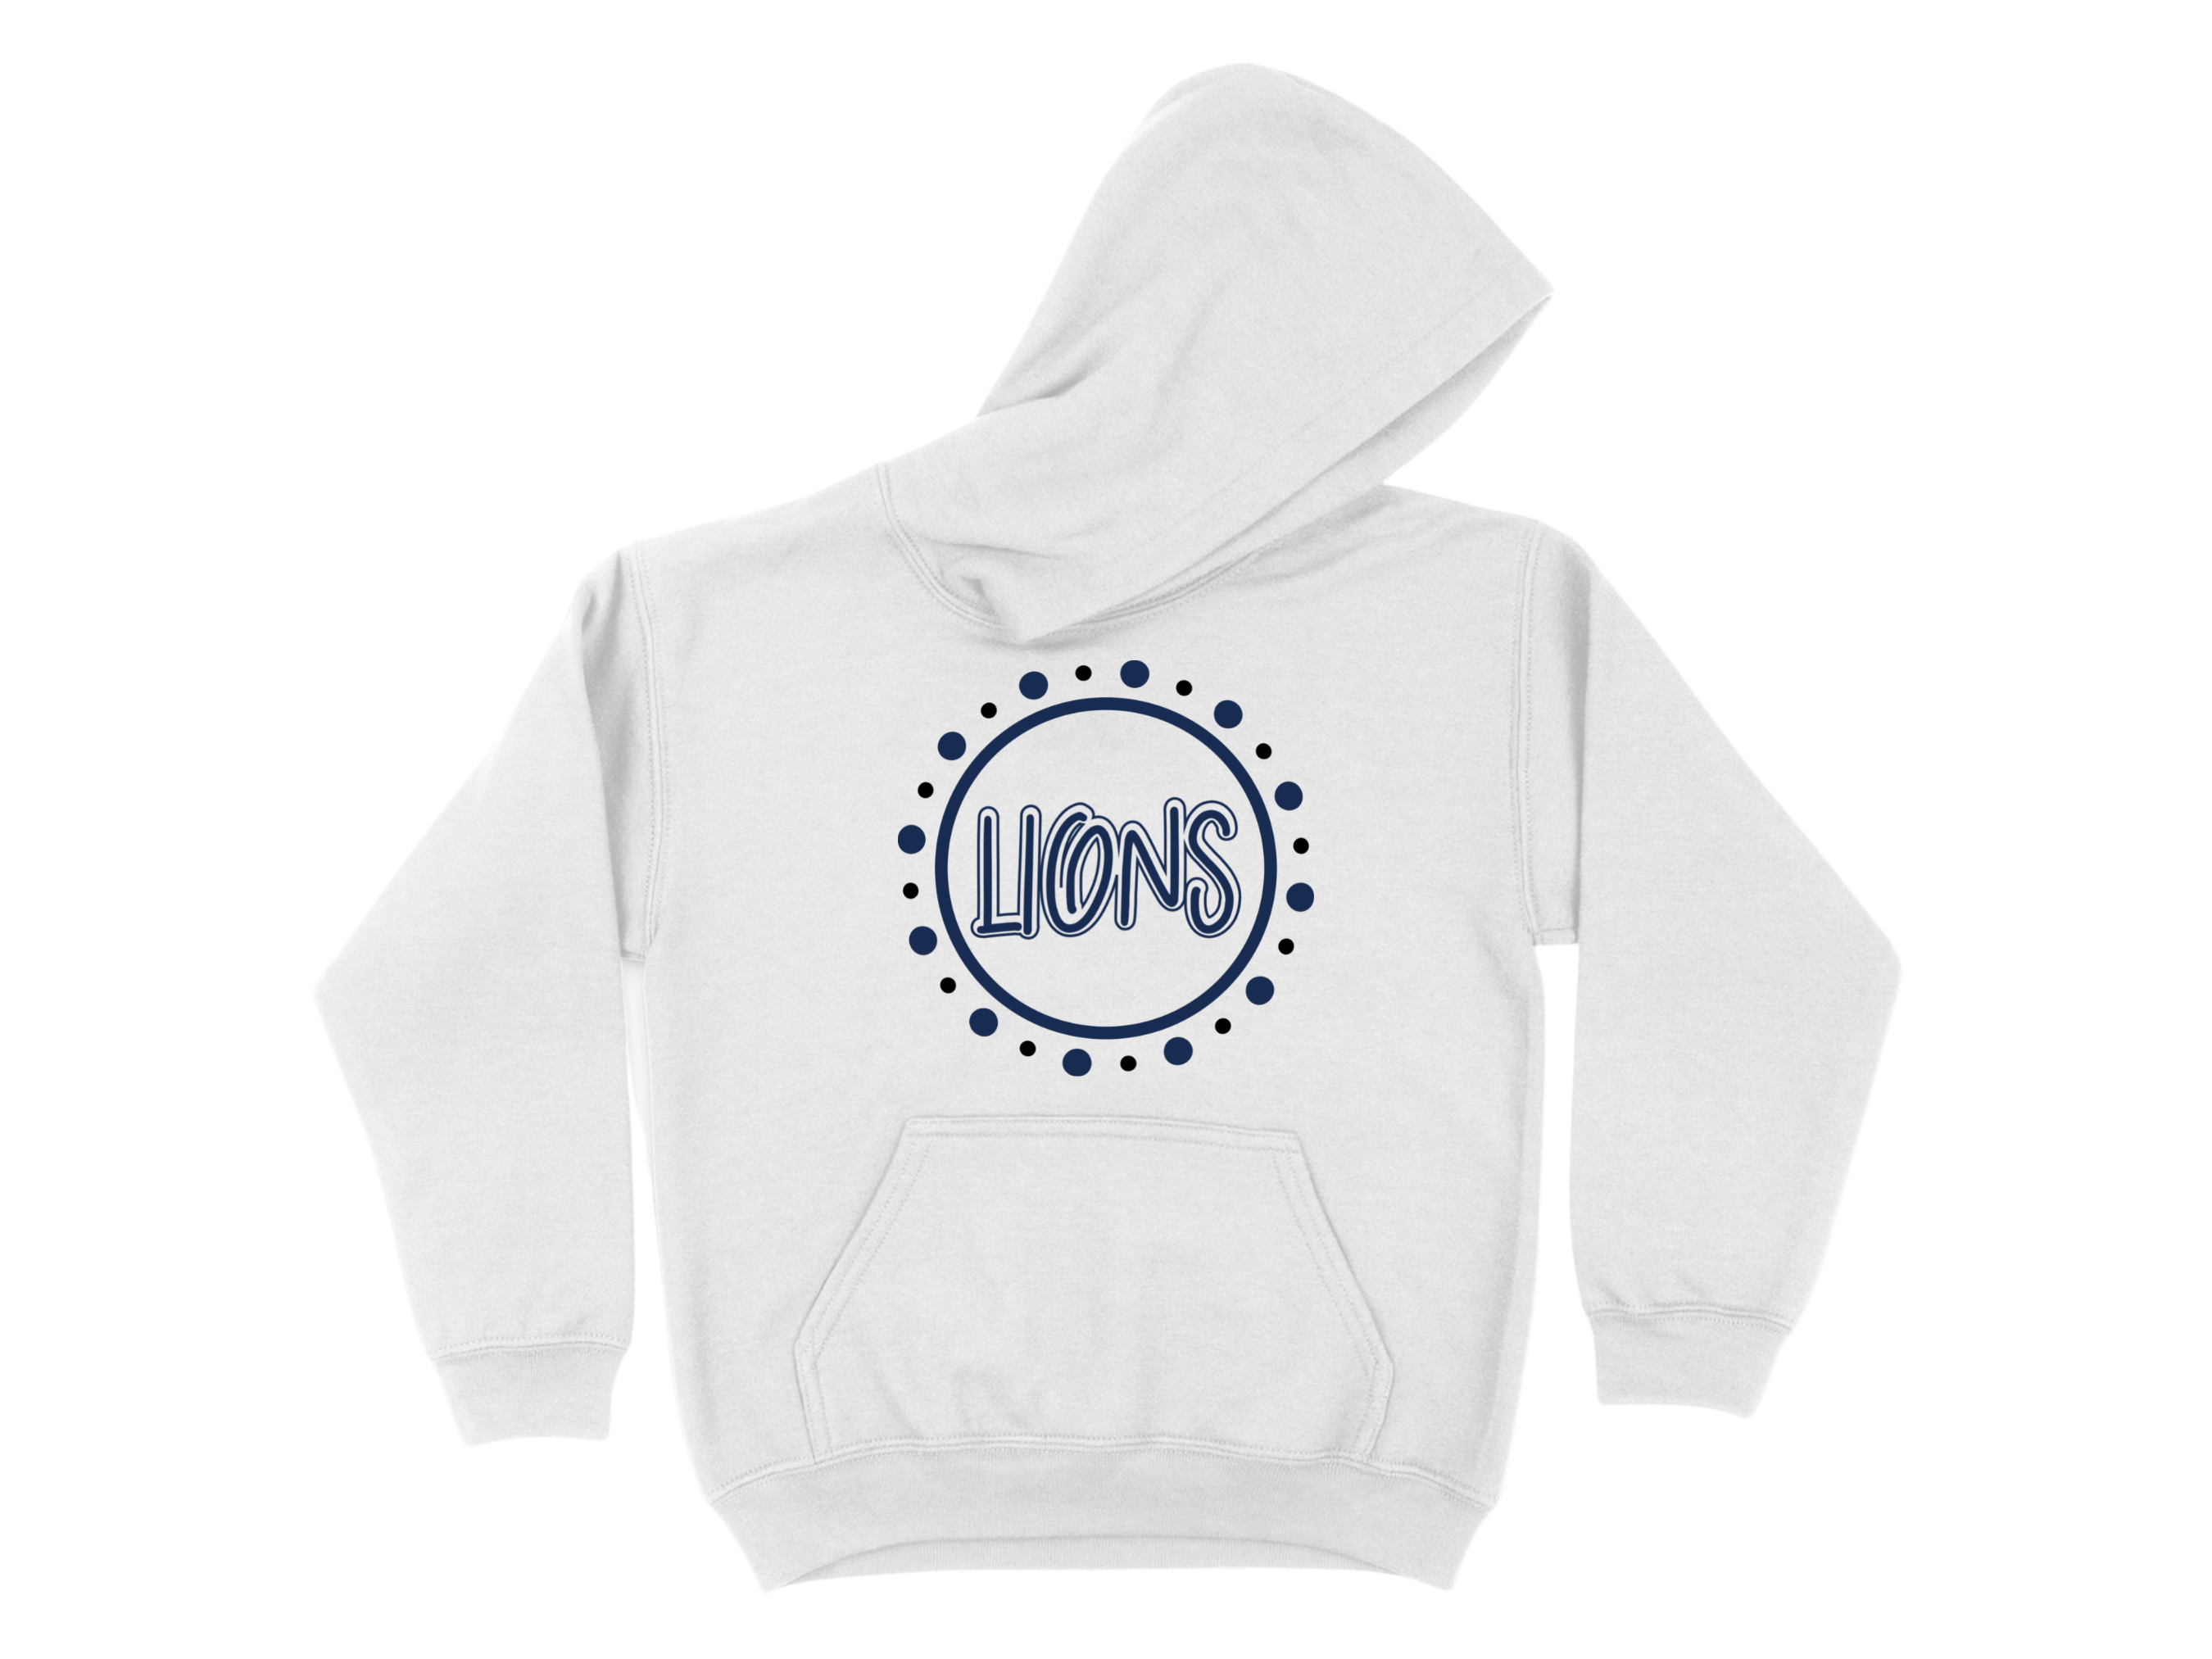 (Lions)  - White Hoodie  Large Image